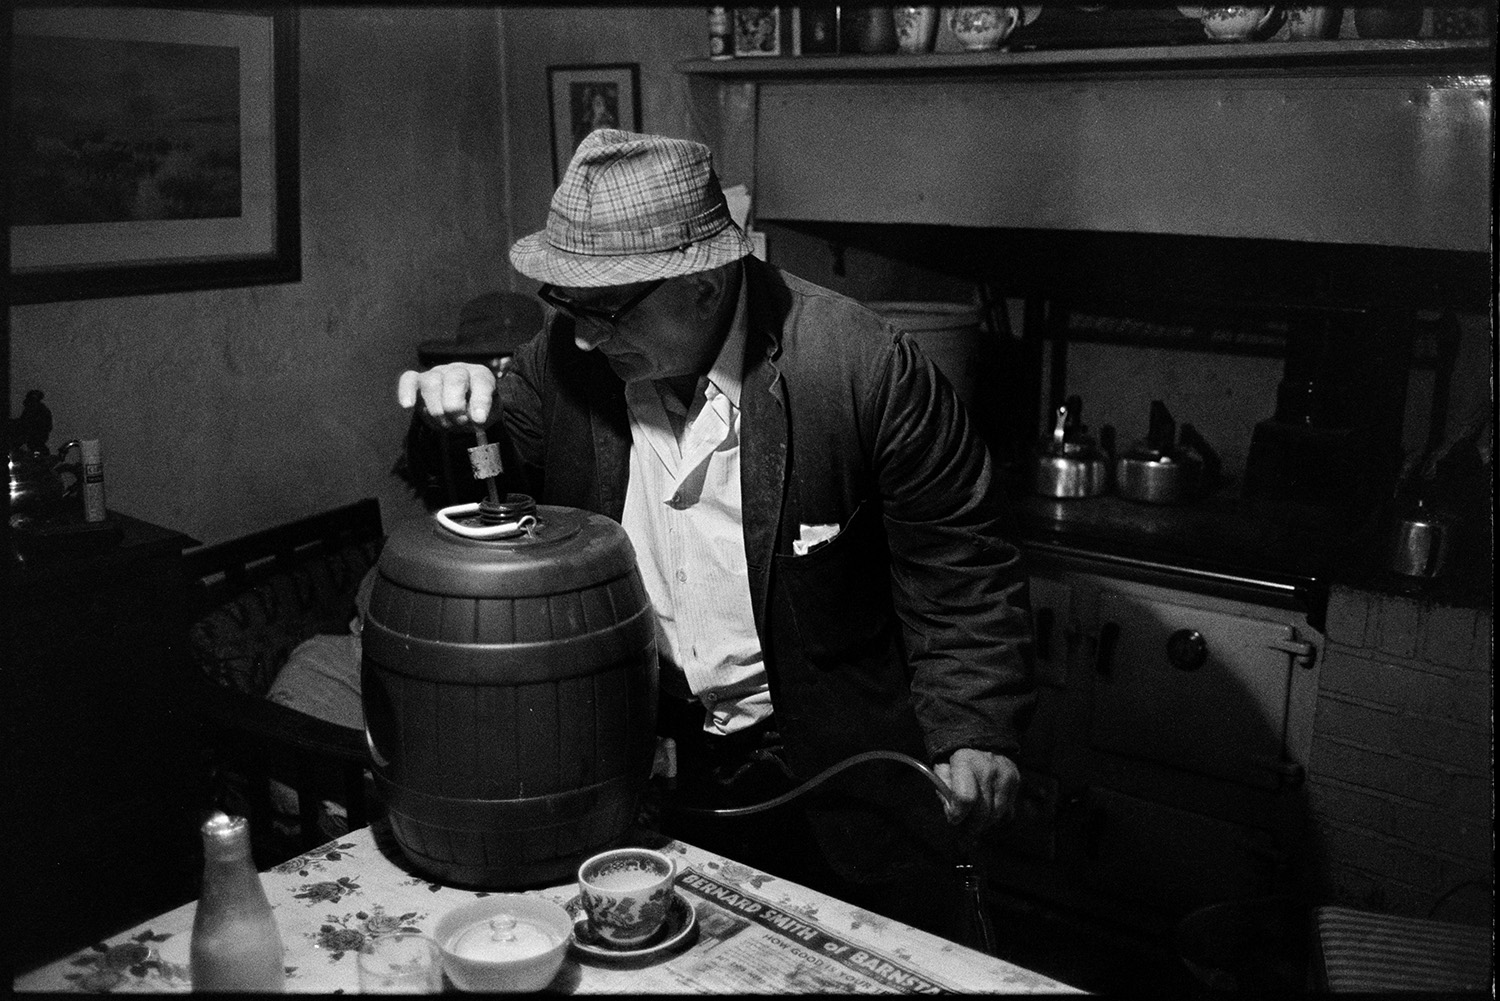 Man making home brewed beer. 
[Archie Parkhouse making beer in his kitchen at Millhams, Dolton. He is looking into the barrel of beer. A rayburn can be seen under a mantelpiece in the background.]